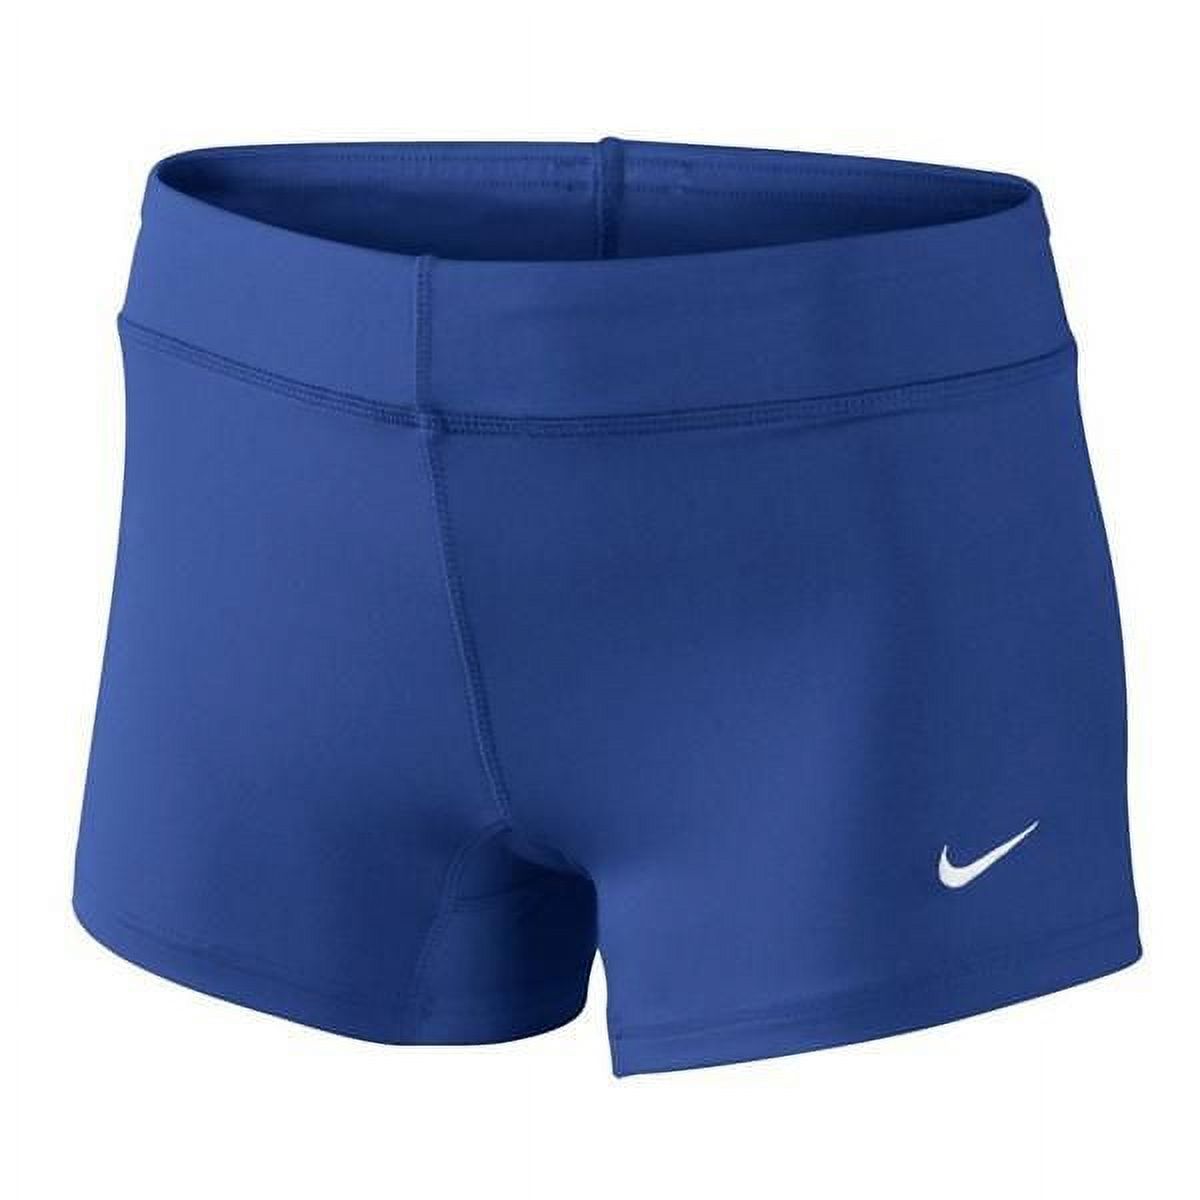 Nike Performance Women's Volleyball Game Shorts (XX-Large, Royal) - image 2 of 3